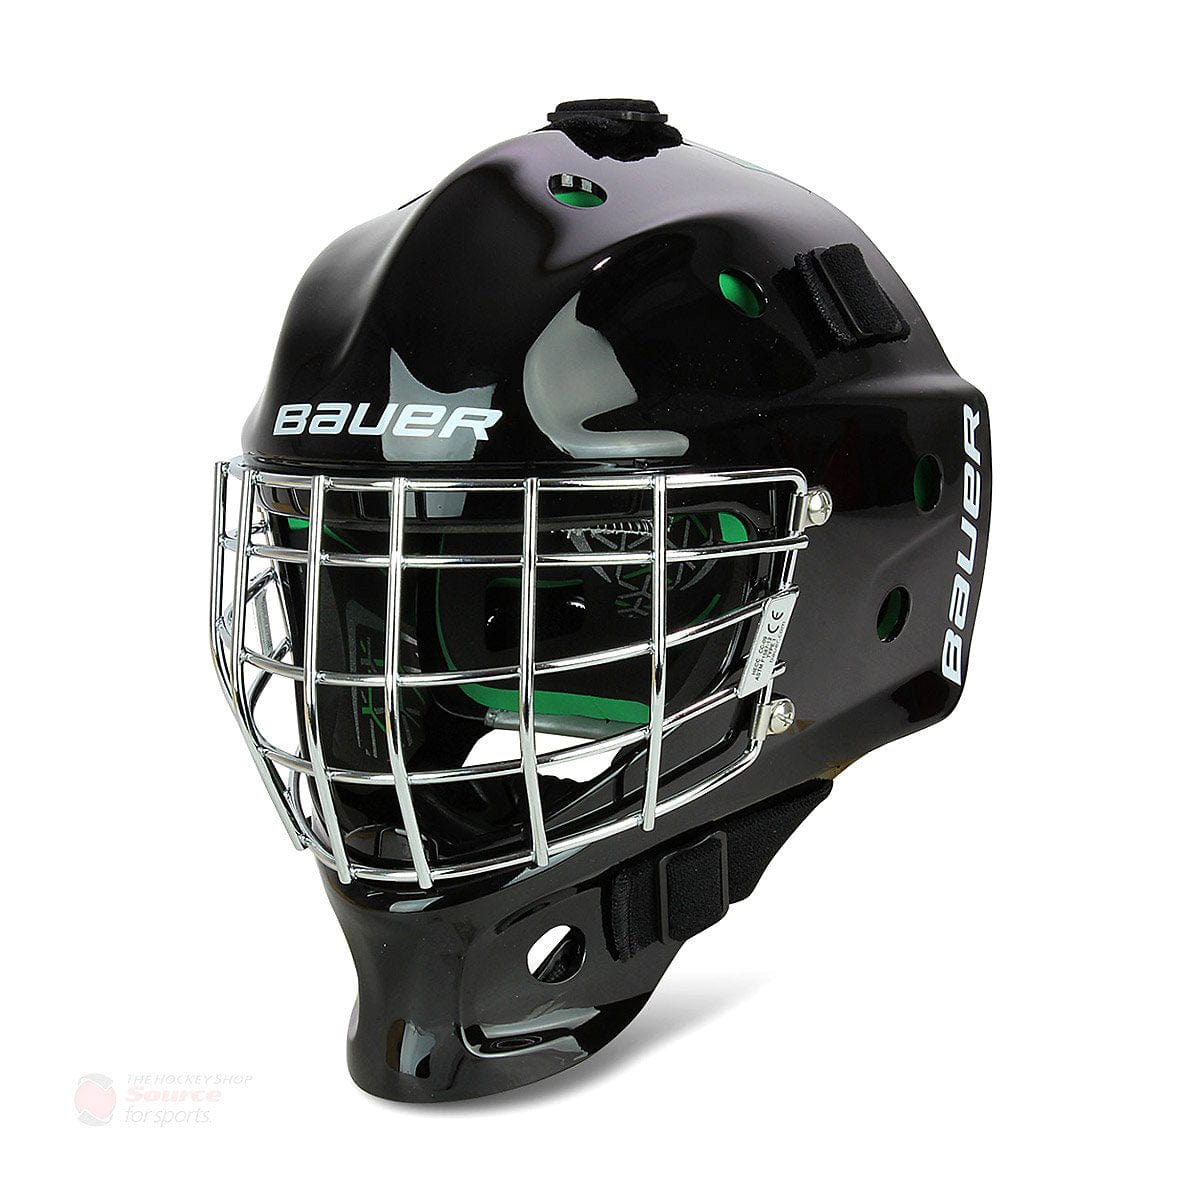 Bauer NME 4 Youth Goalie Mask